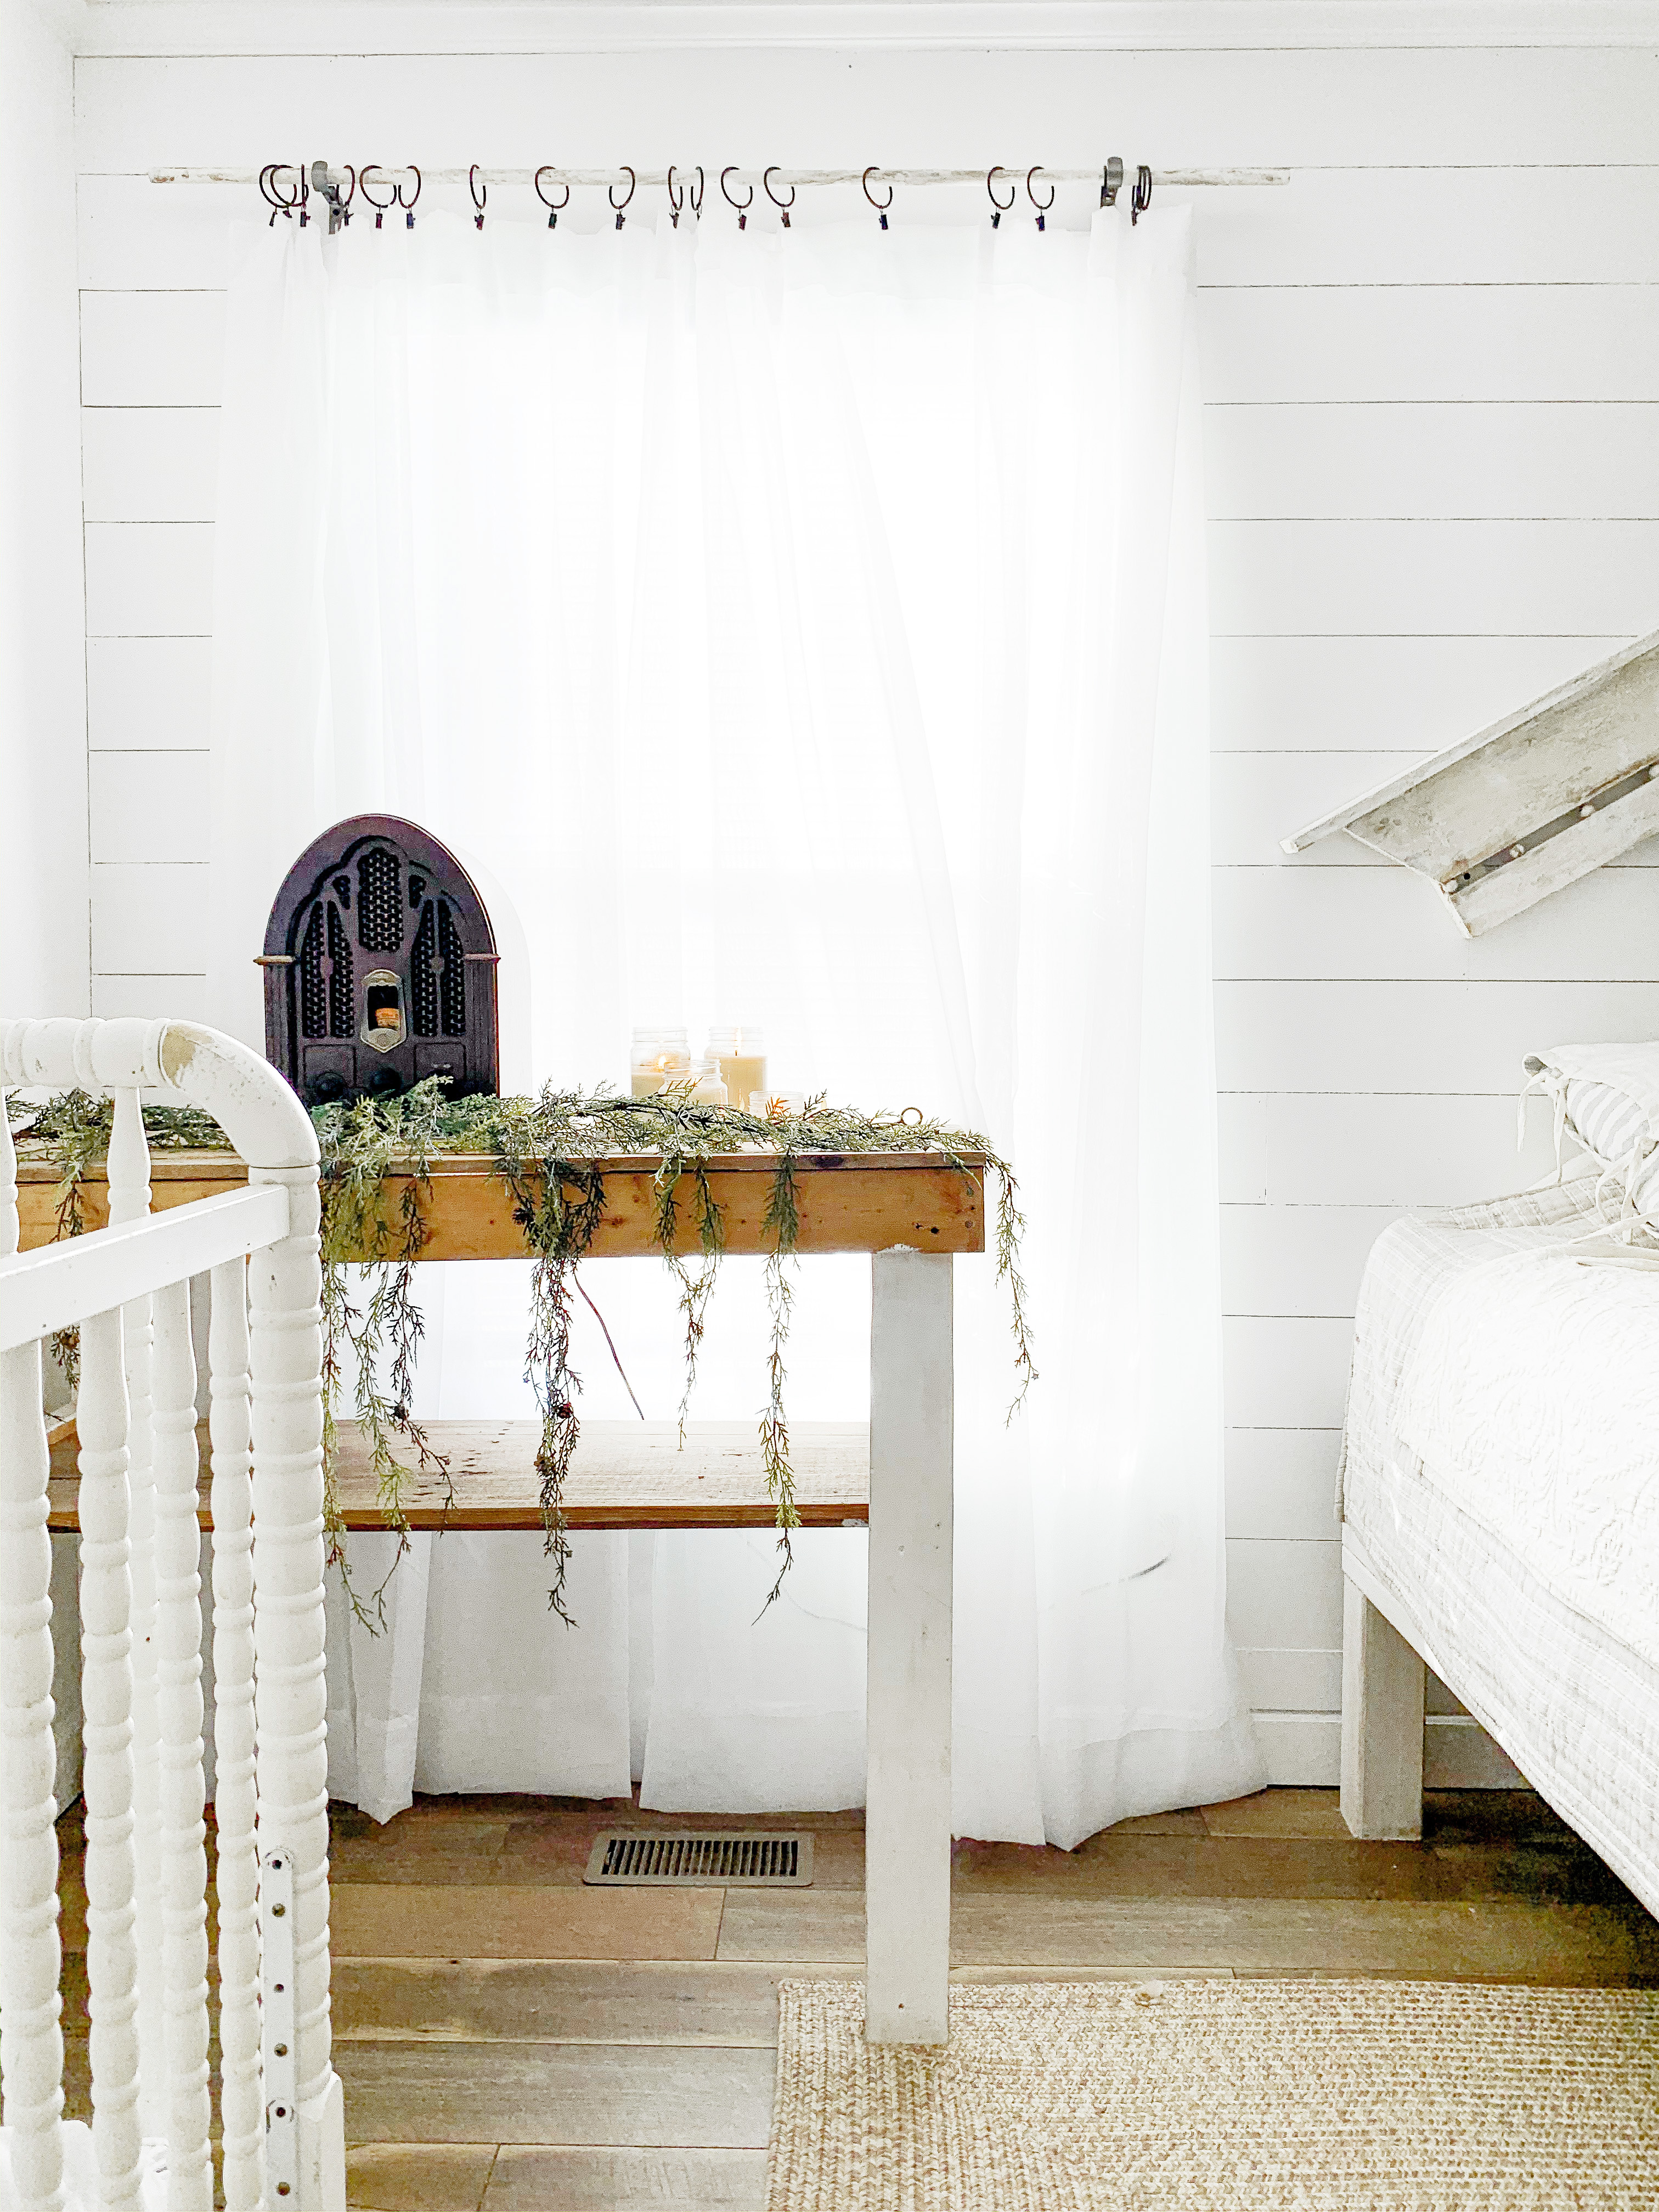 Cozy Cottage Style Farmhouse Bedroom Decorated For Christmas With Layered Wreaths & Twinkle Lights